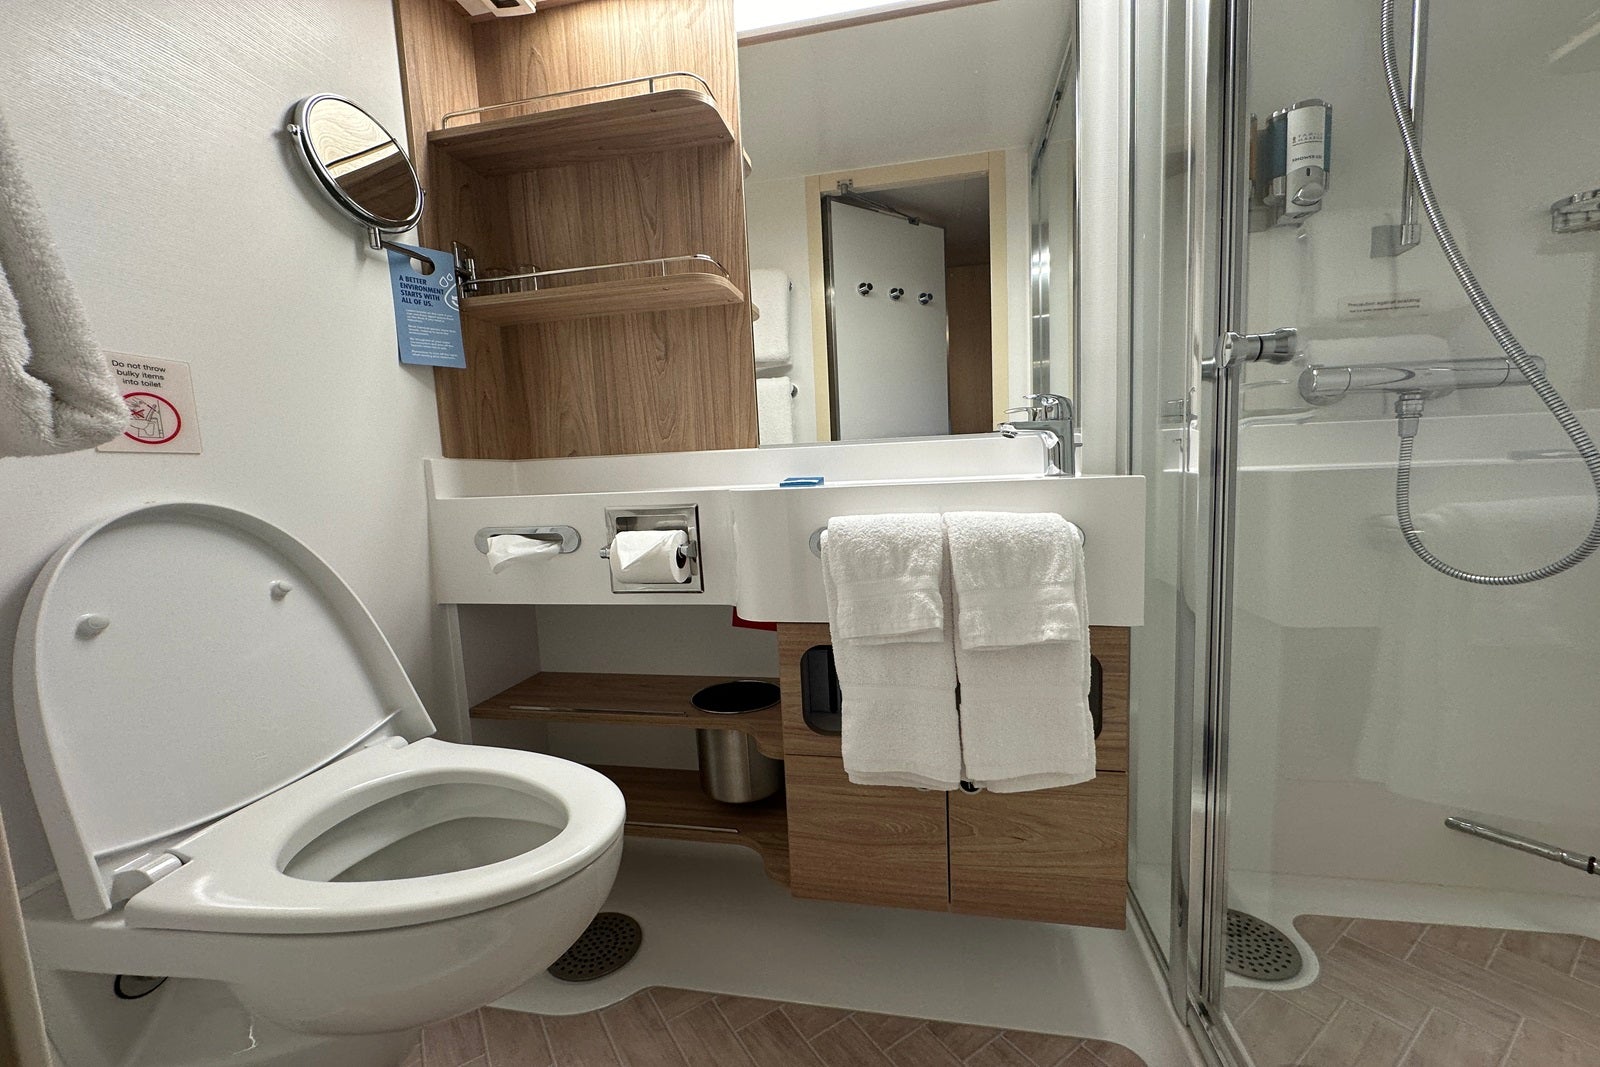 A cruise ship cabin bathroom with light wood shelves, a sink, a toilet and a shower